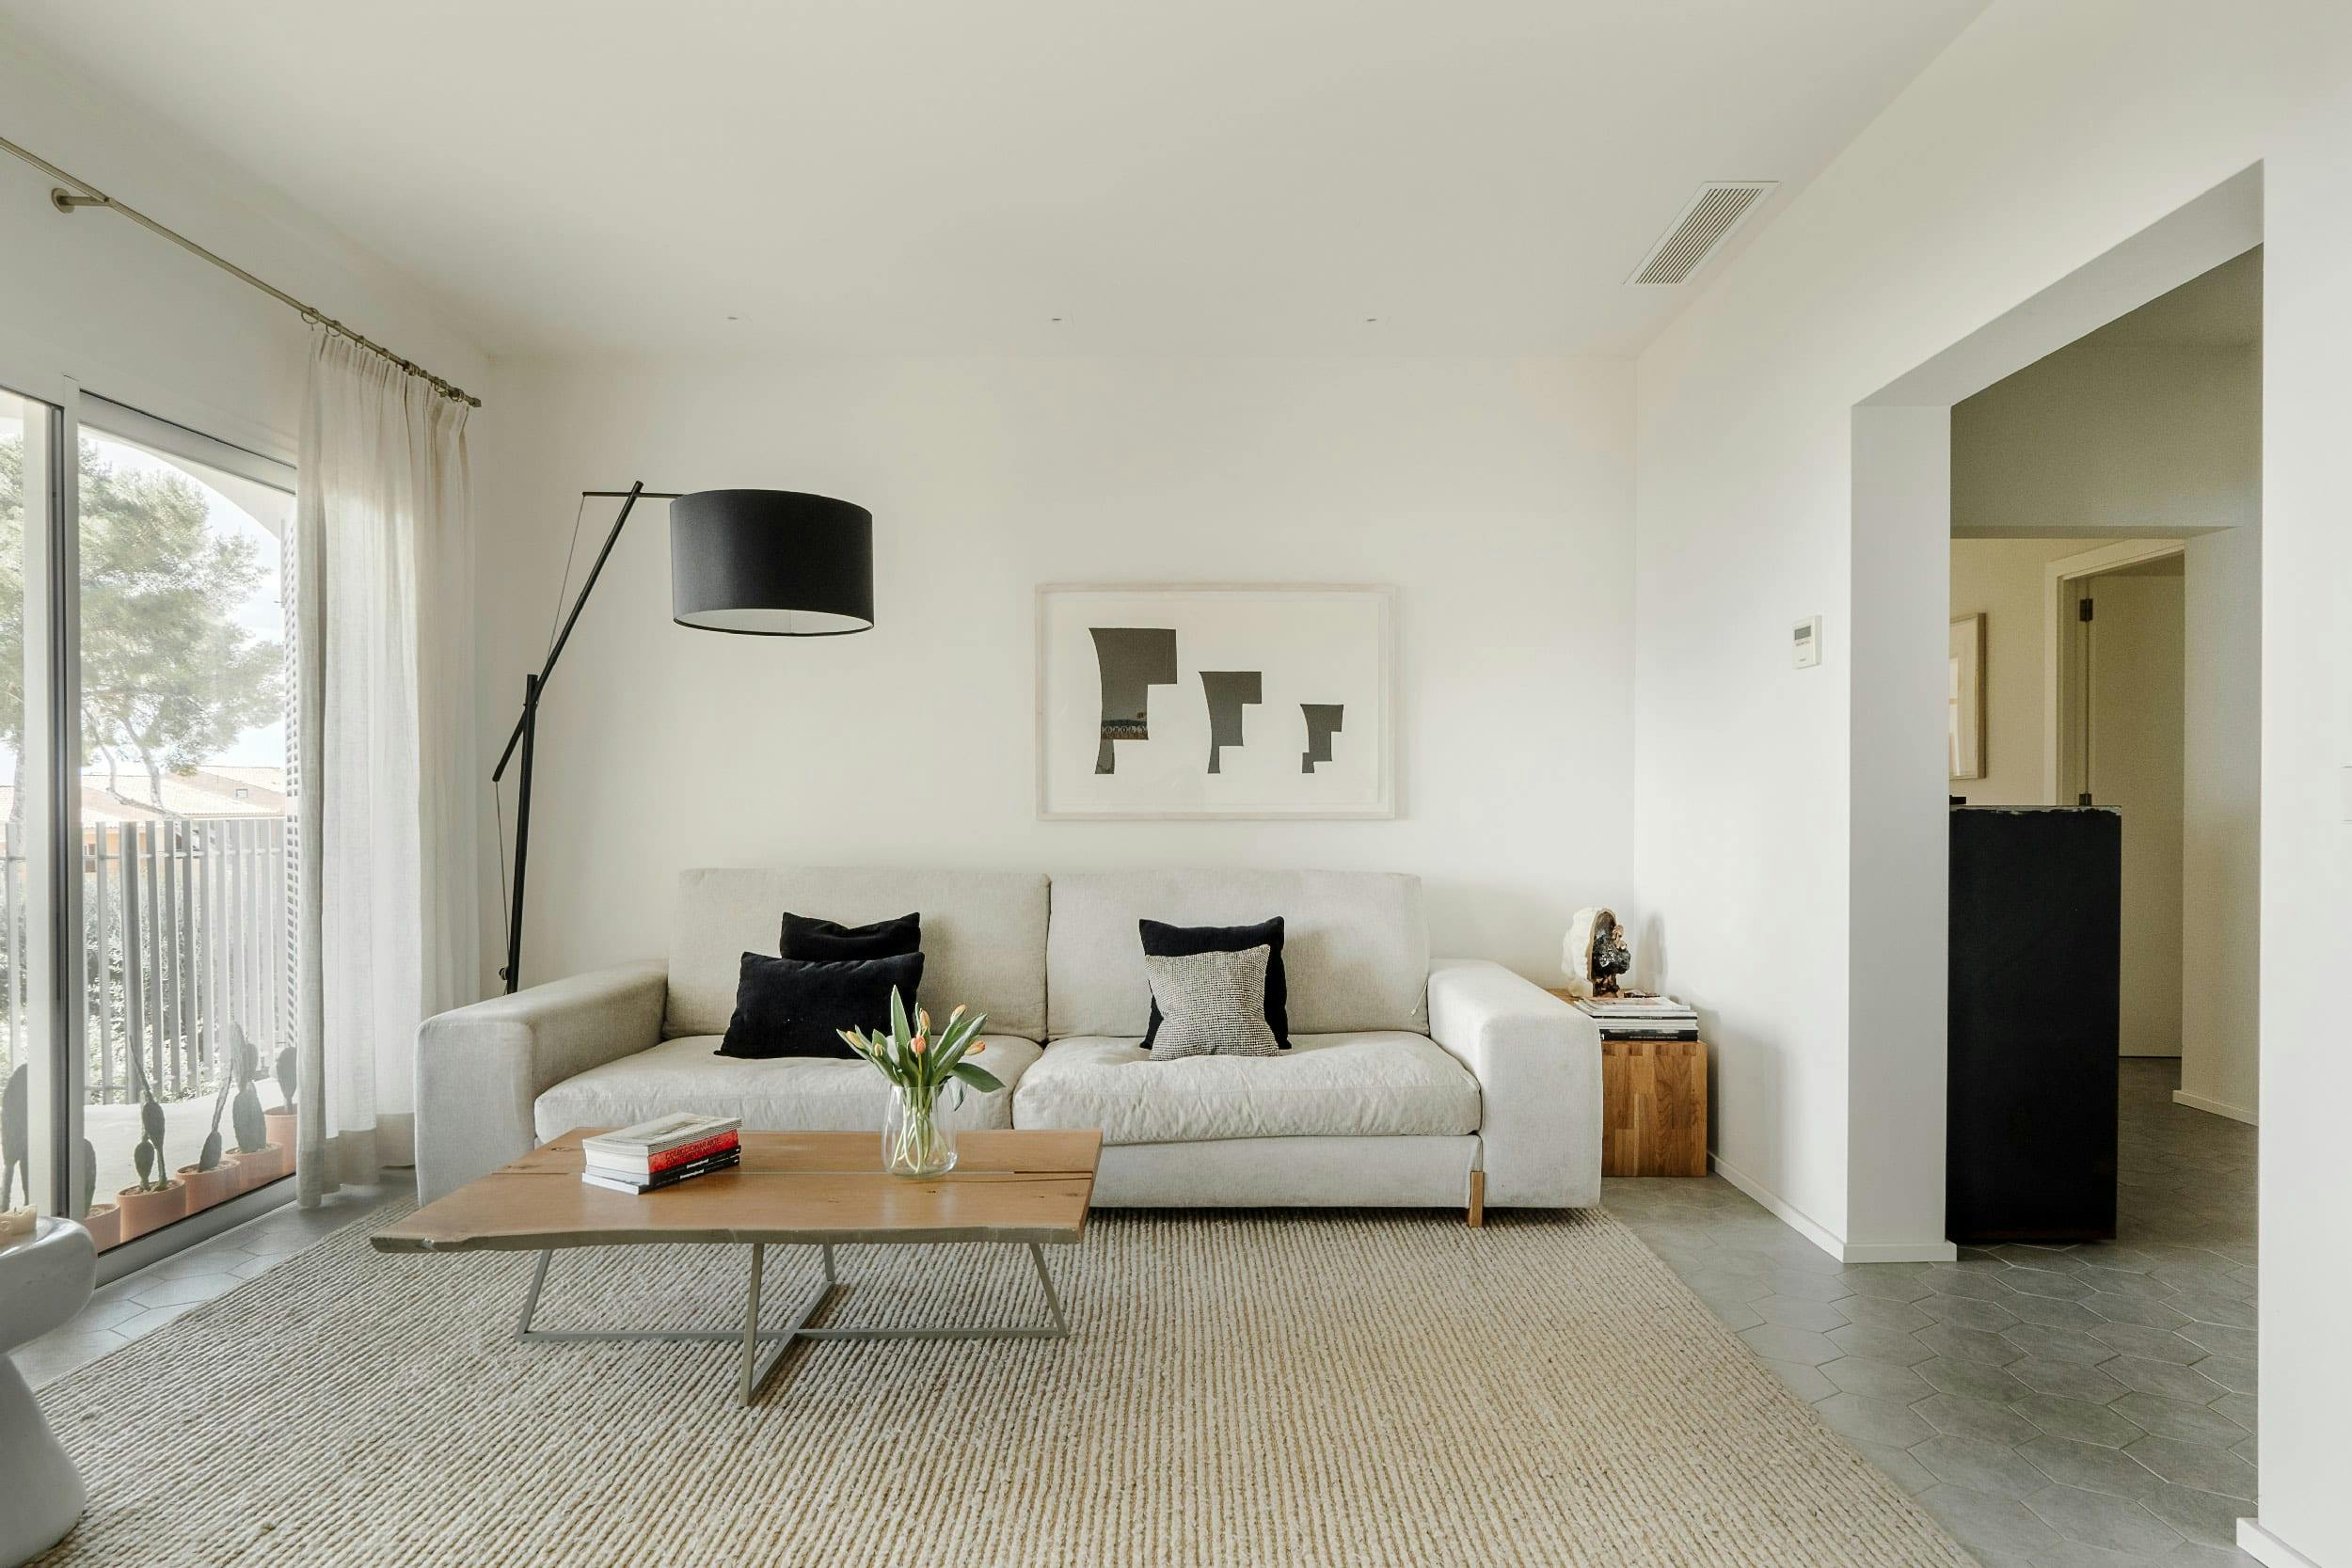 The image features a spacious, modern living room with a white couch, a coffee table, and a television.